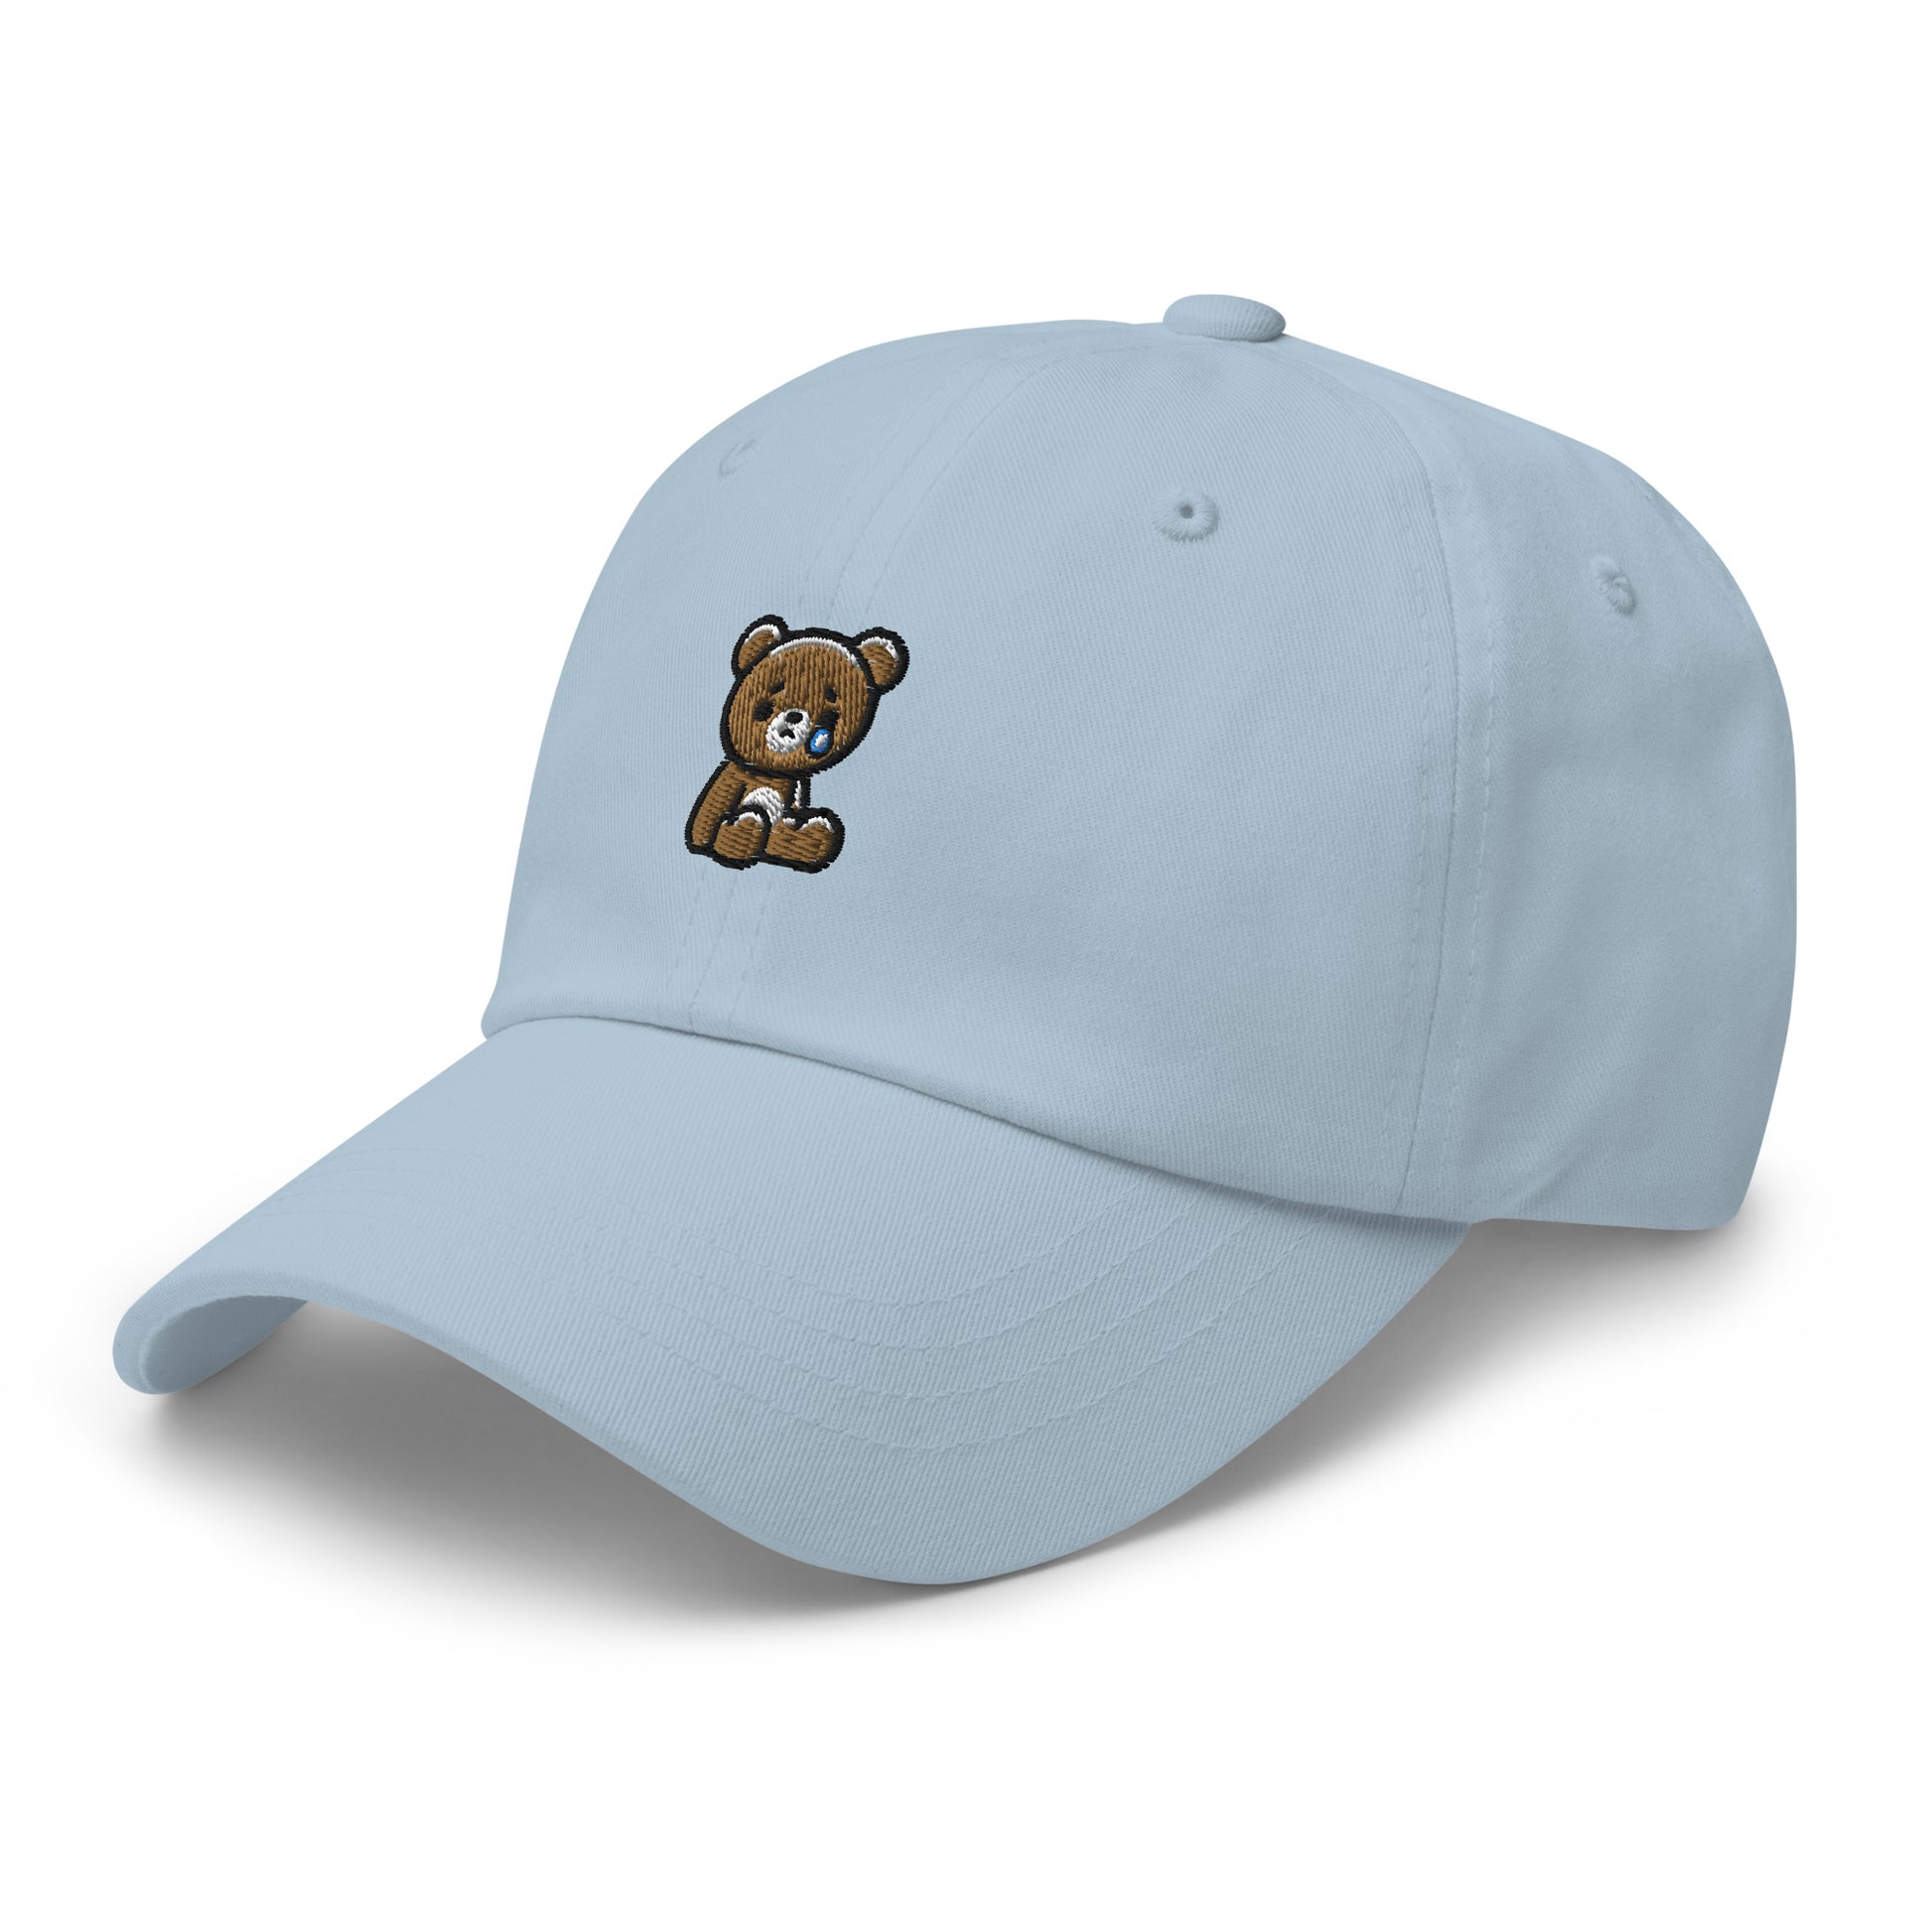 cap-from-the-front-with-cartoon-symbol